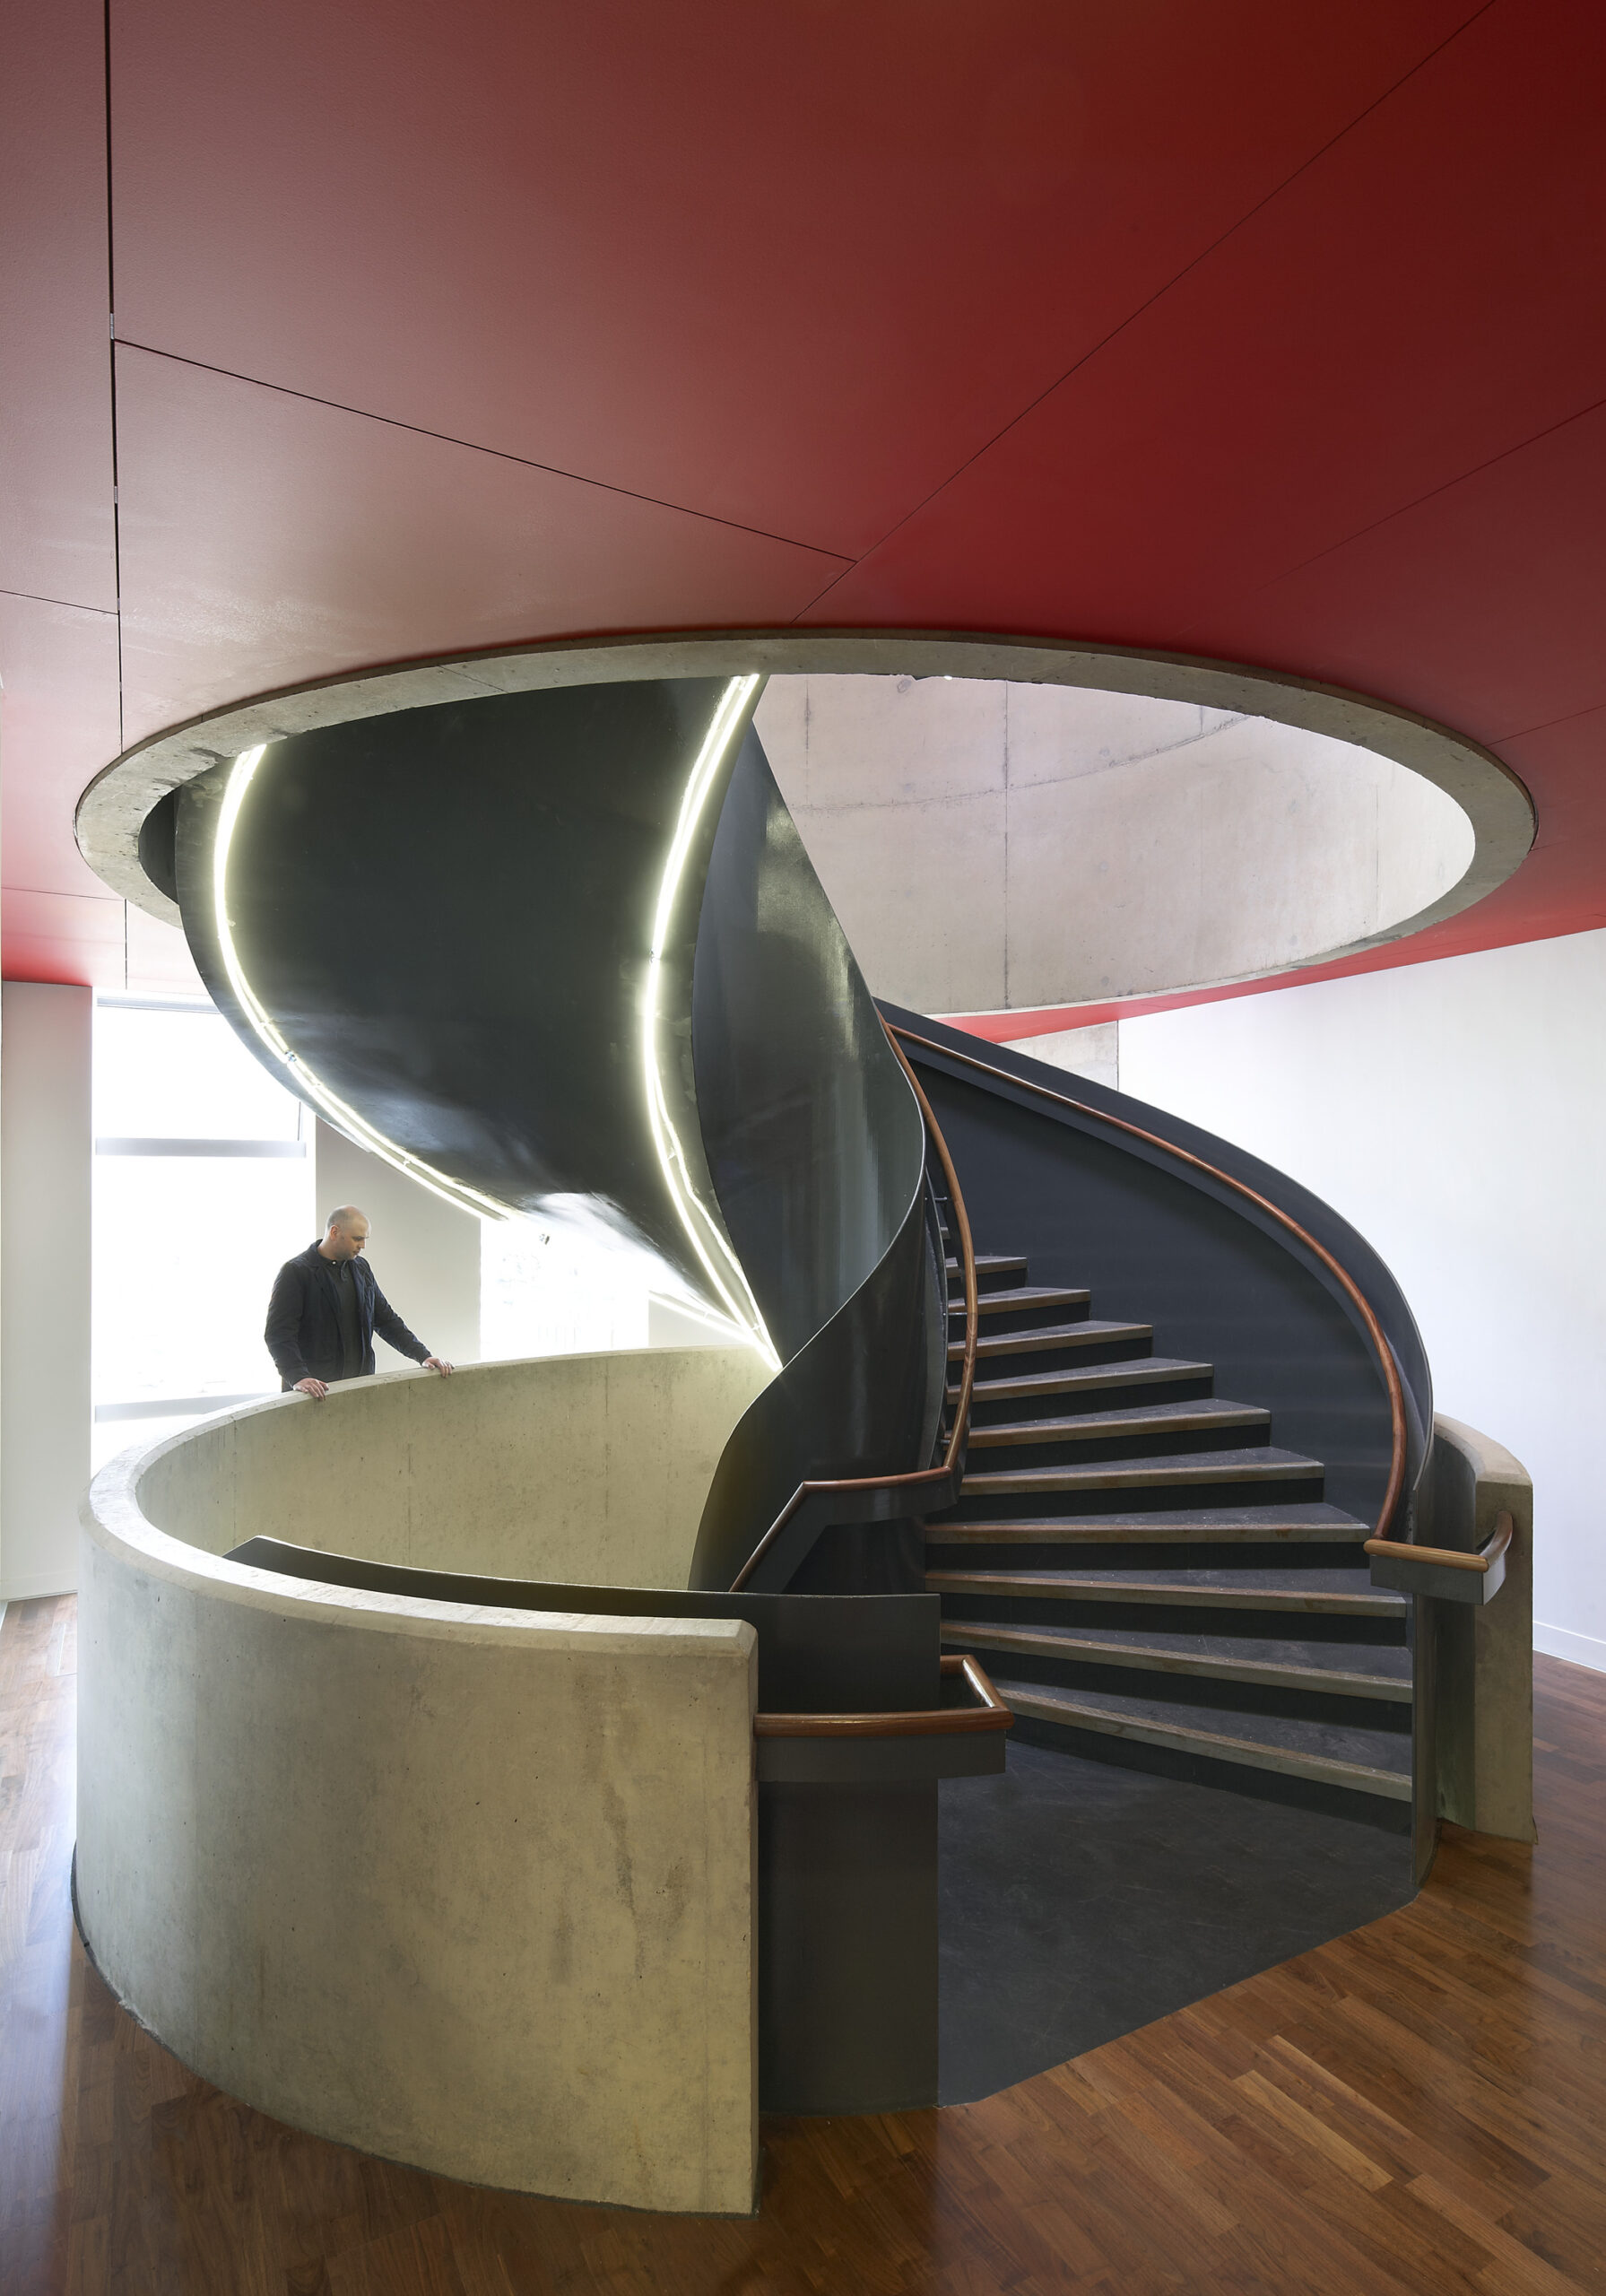 Interior shot of man looking down a spiral staircase